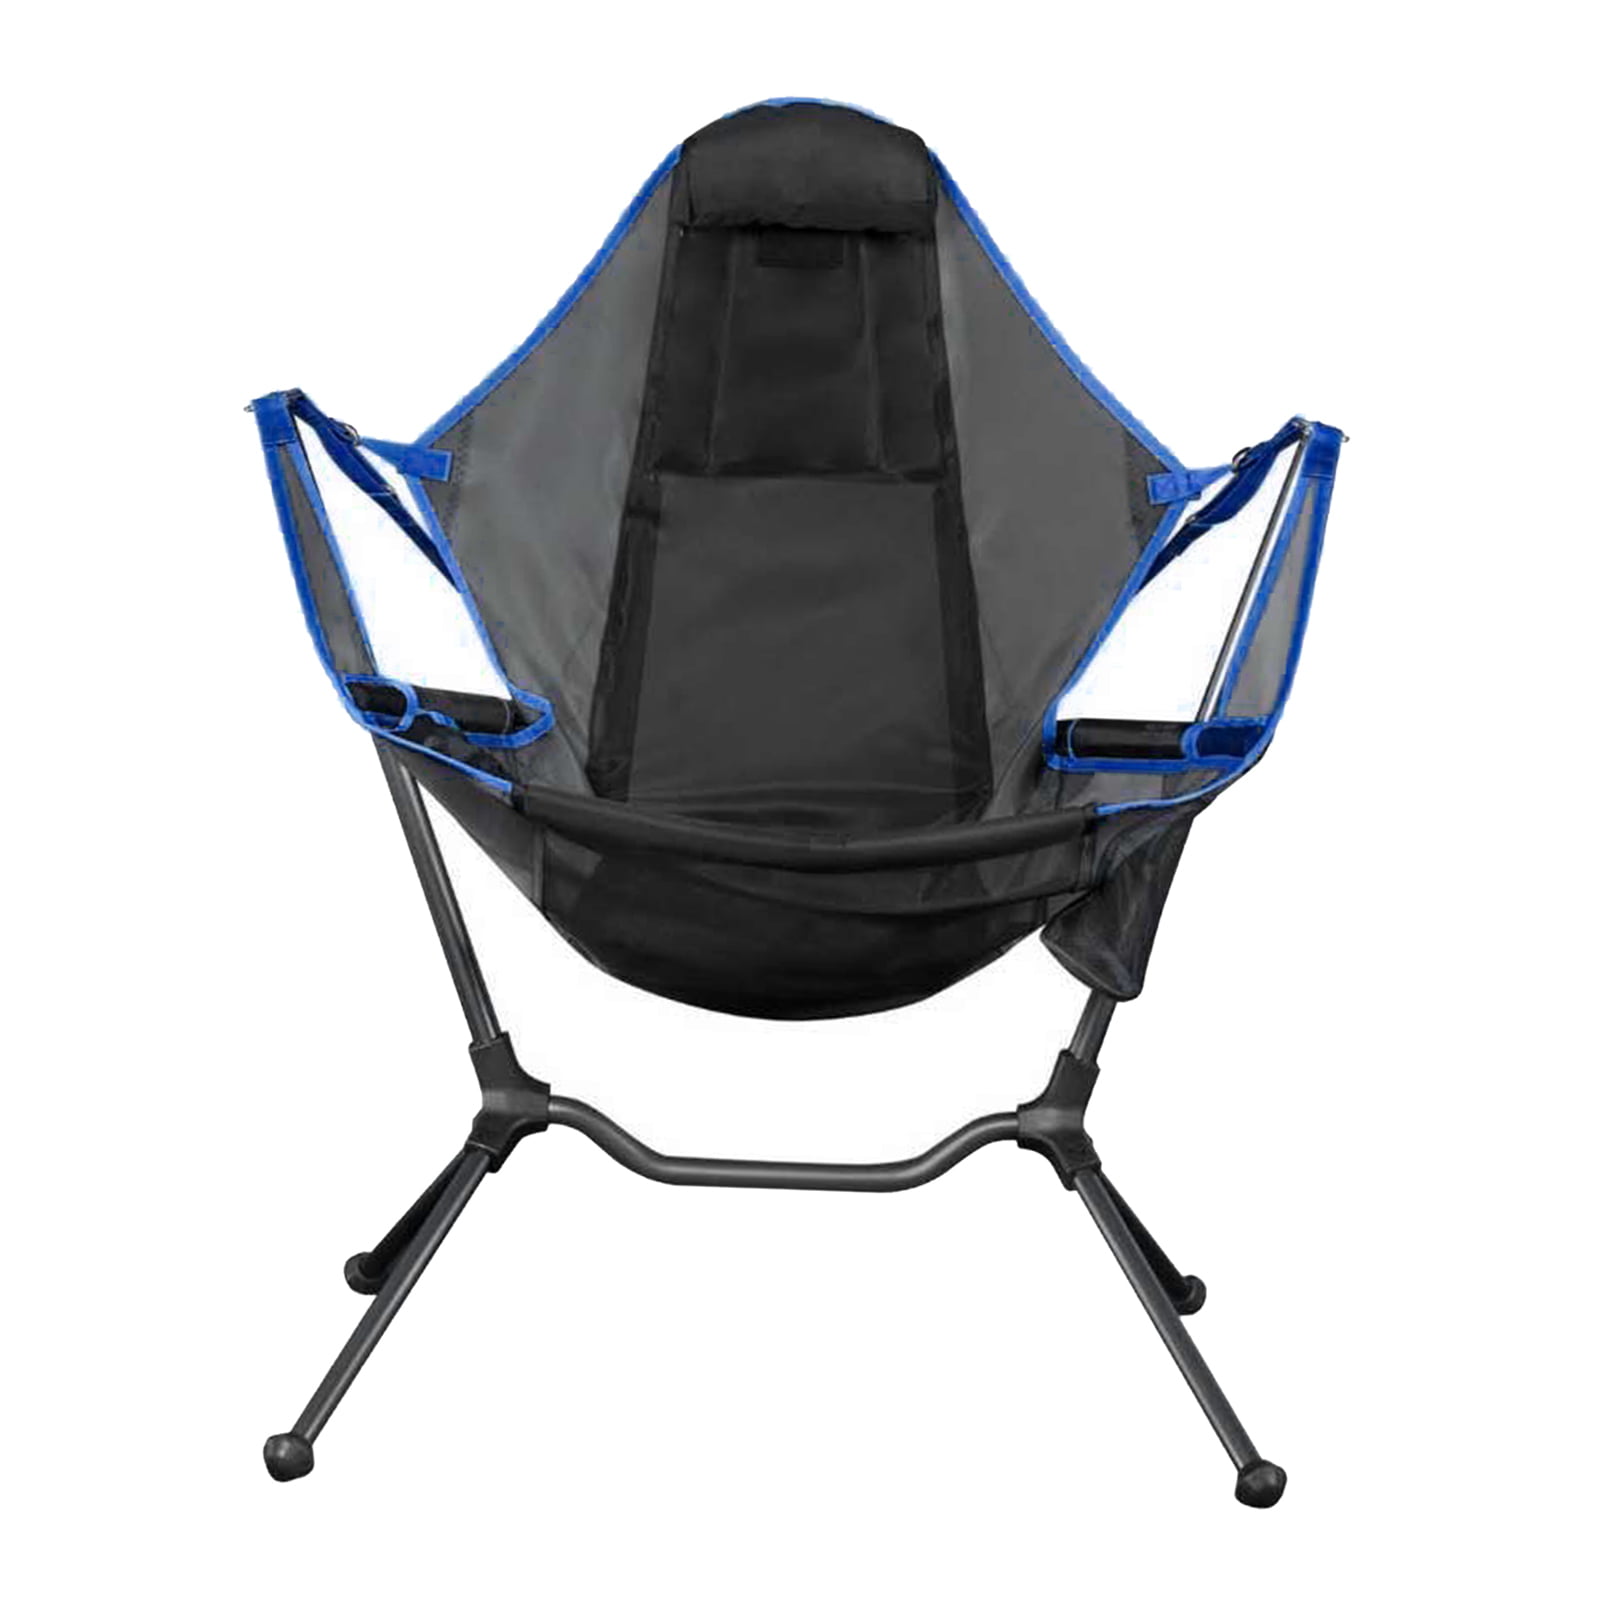 Portable Rocking Chair Outdoor Camping Foldable Seat Cup Phone Holder Polyester 